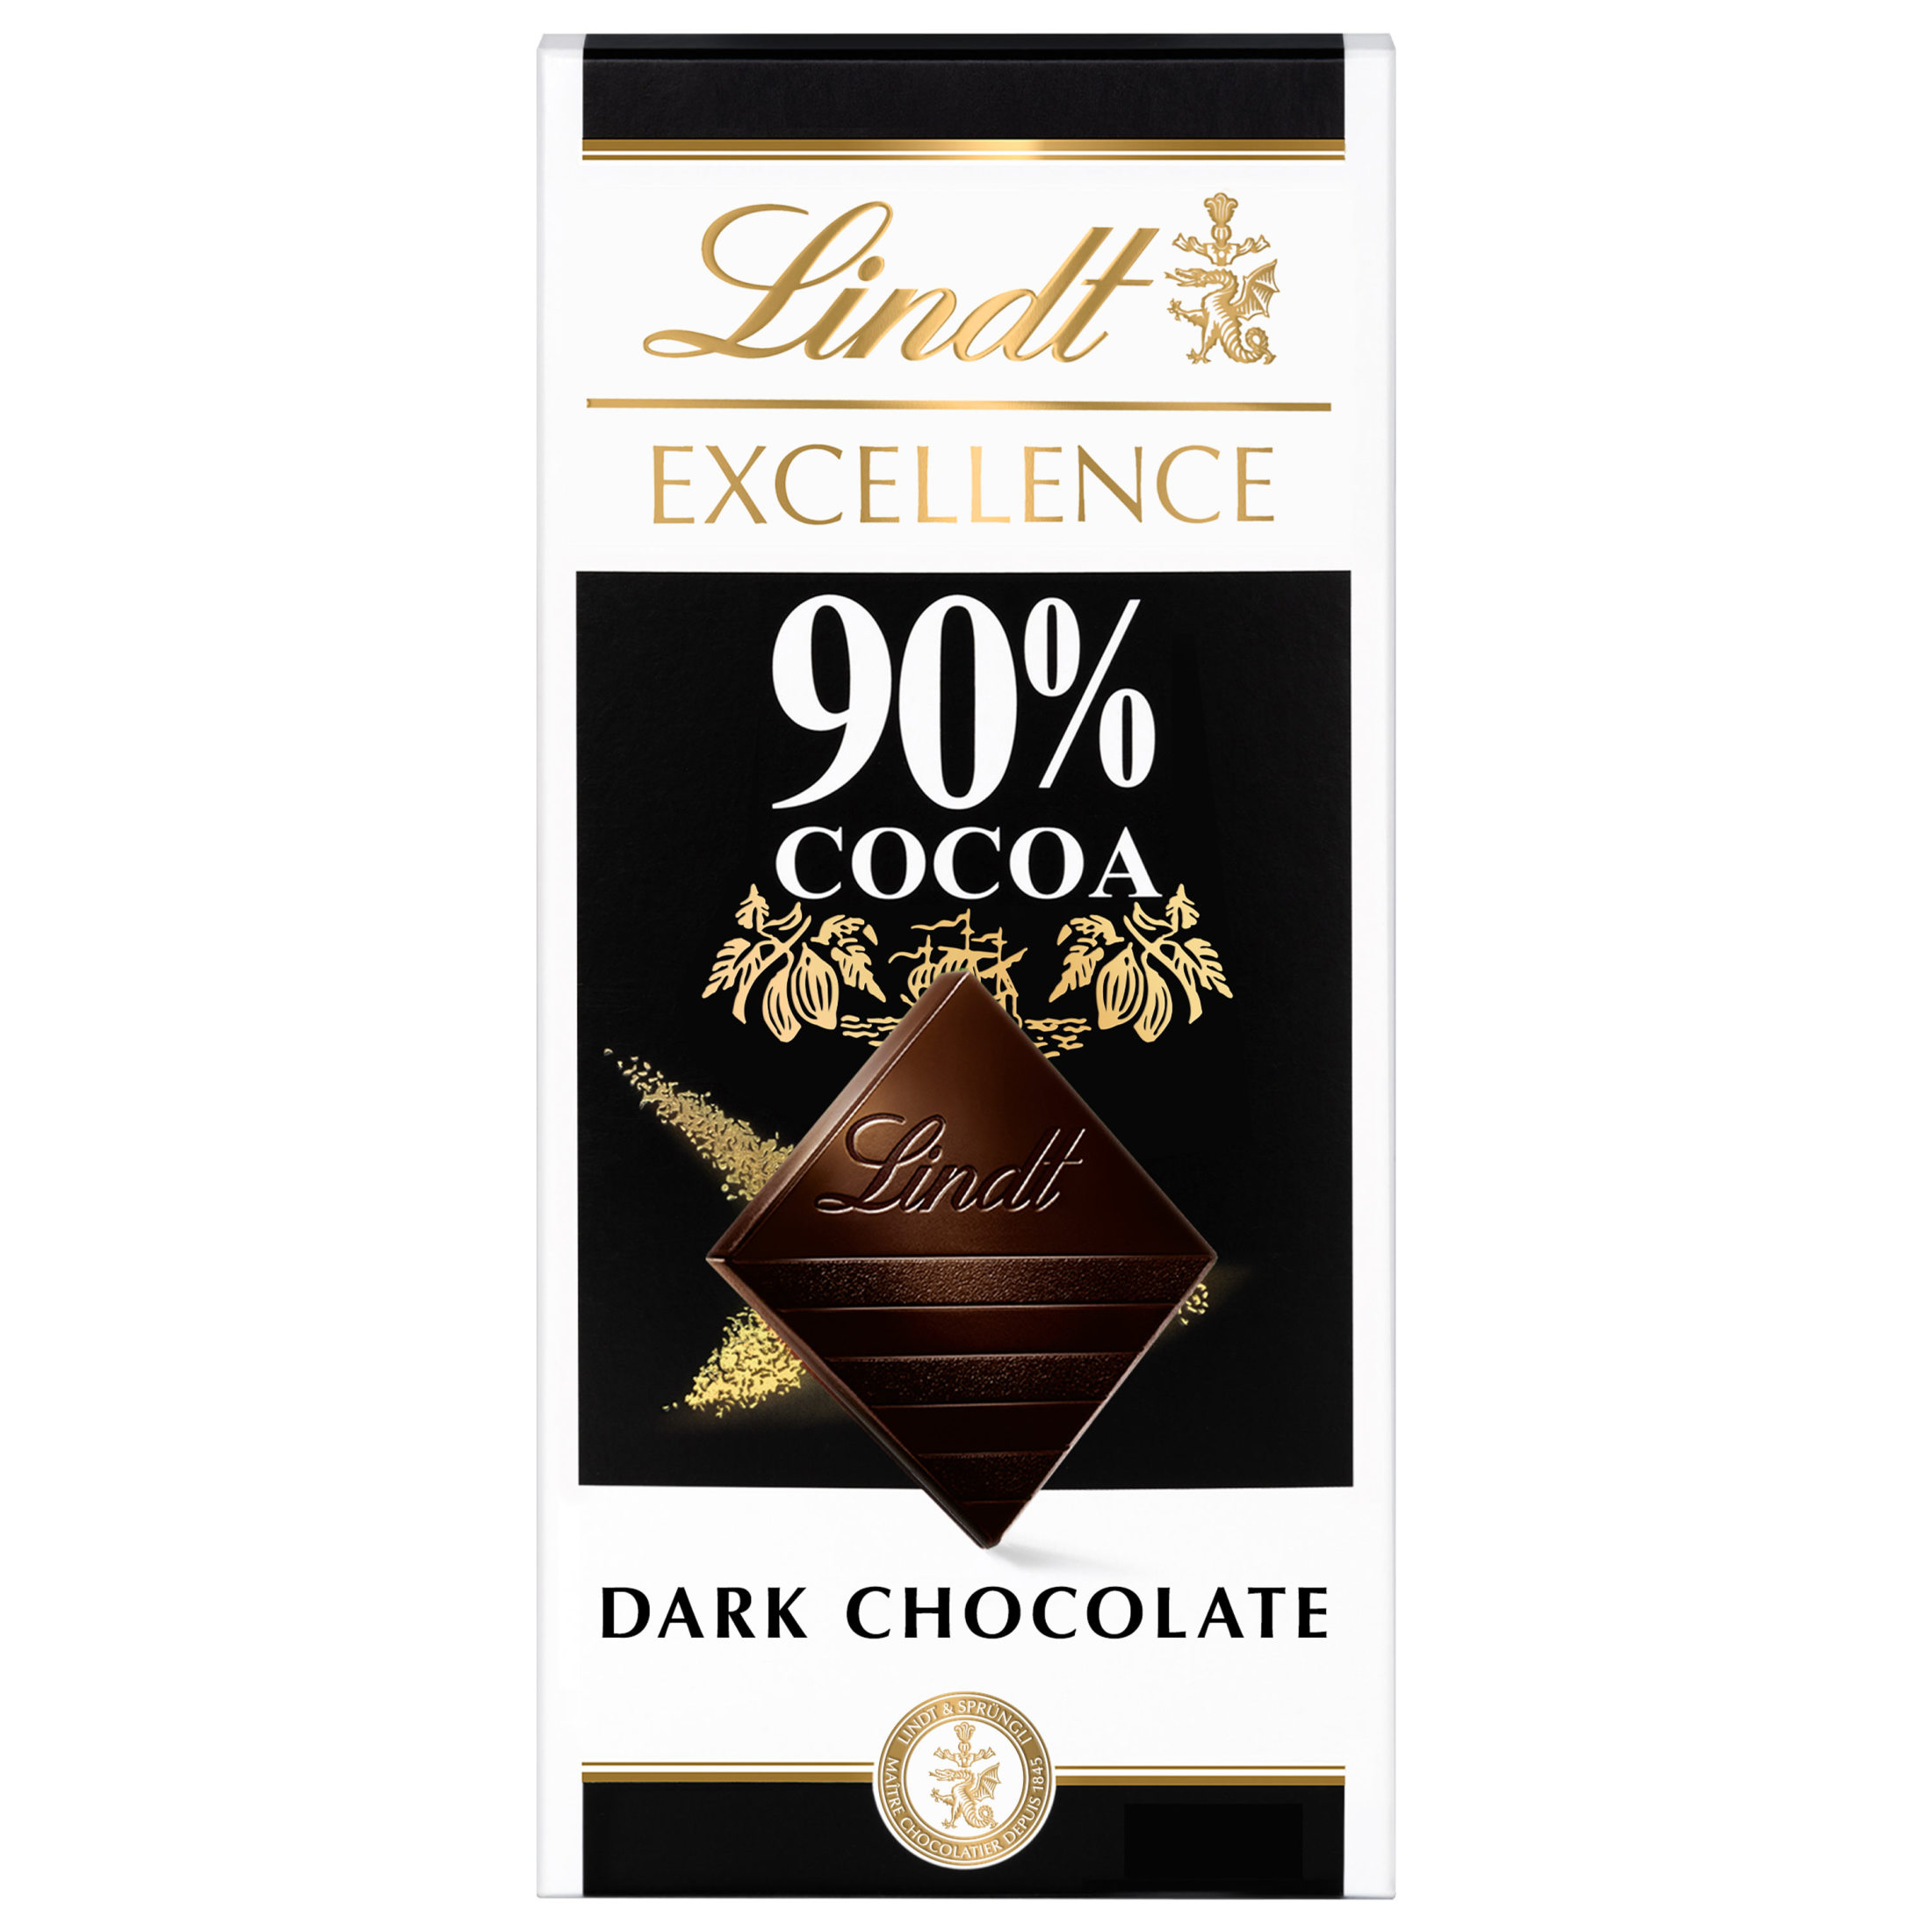 Lindt Excellence 90% Cocoa Dark Chocolate Candy Bar, 3.5 oz. Bar - image 1 of 16